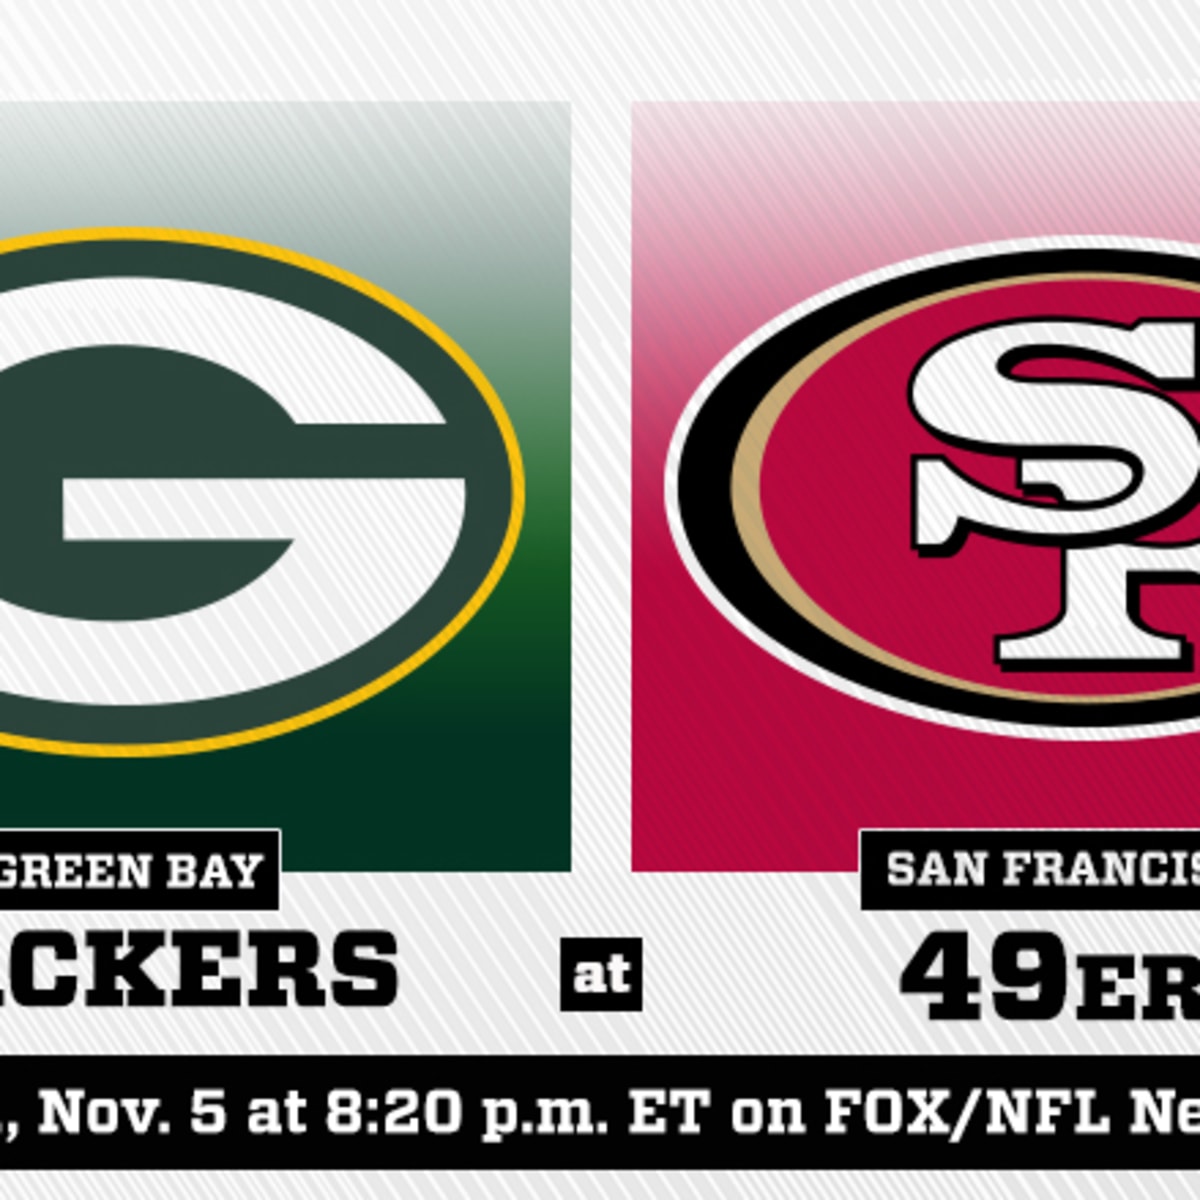 green bay and 49ers game today